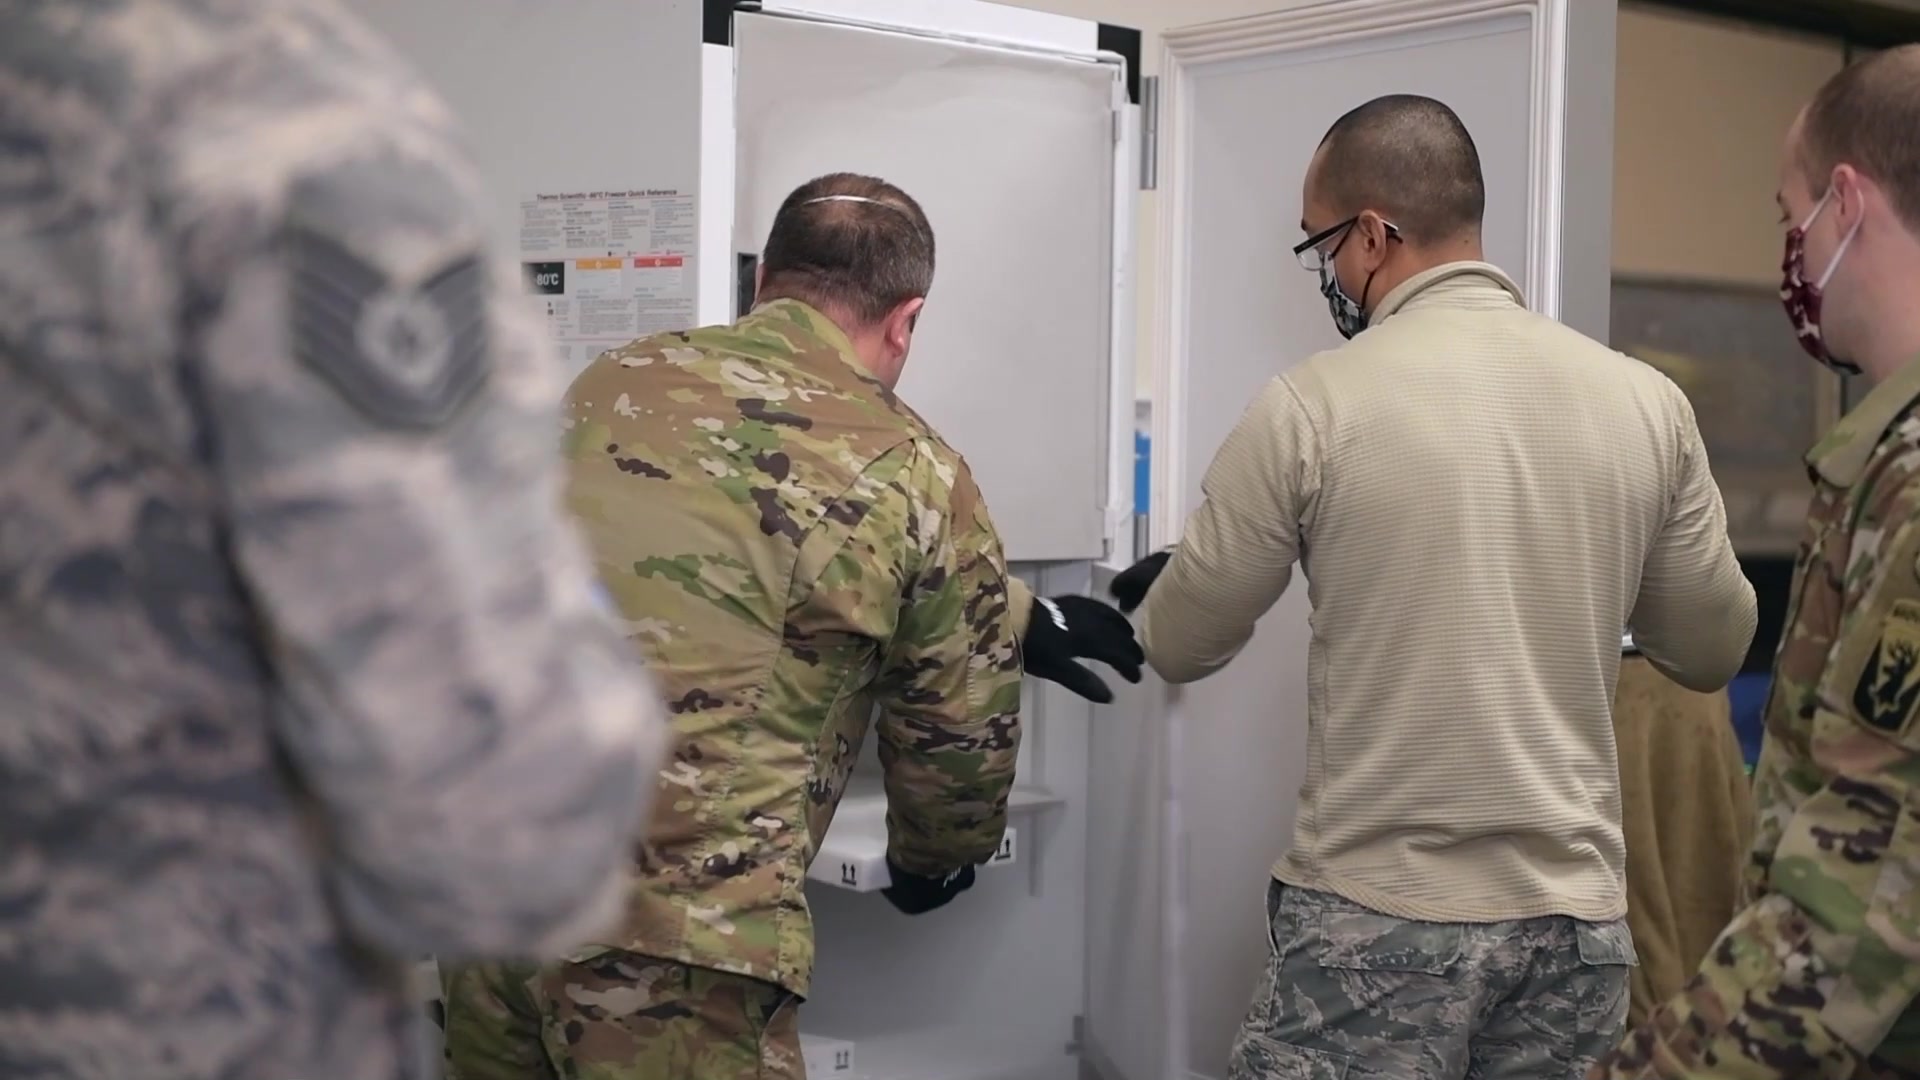 This week, Vermont began distribution of its first COVID-19 vaccines to strategic locations throughout the state with assistance from Vermont Air National Guardsmen.